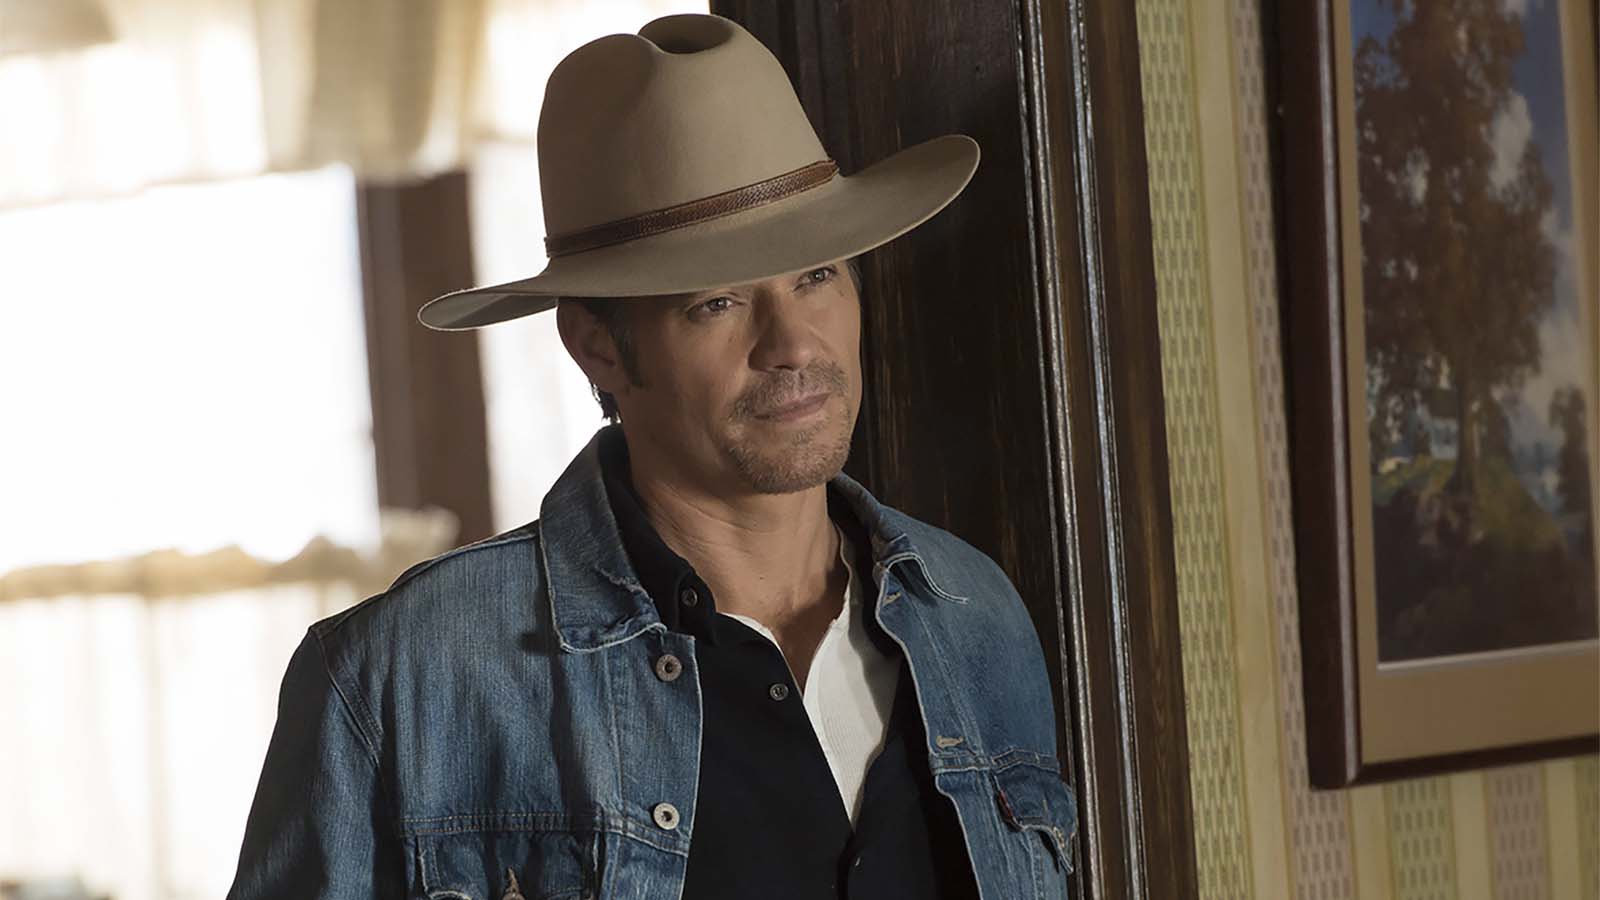 Justified City Primeval Release Date, Cast, Storyline, and Everything